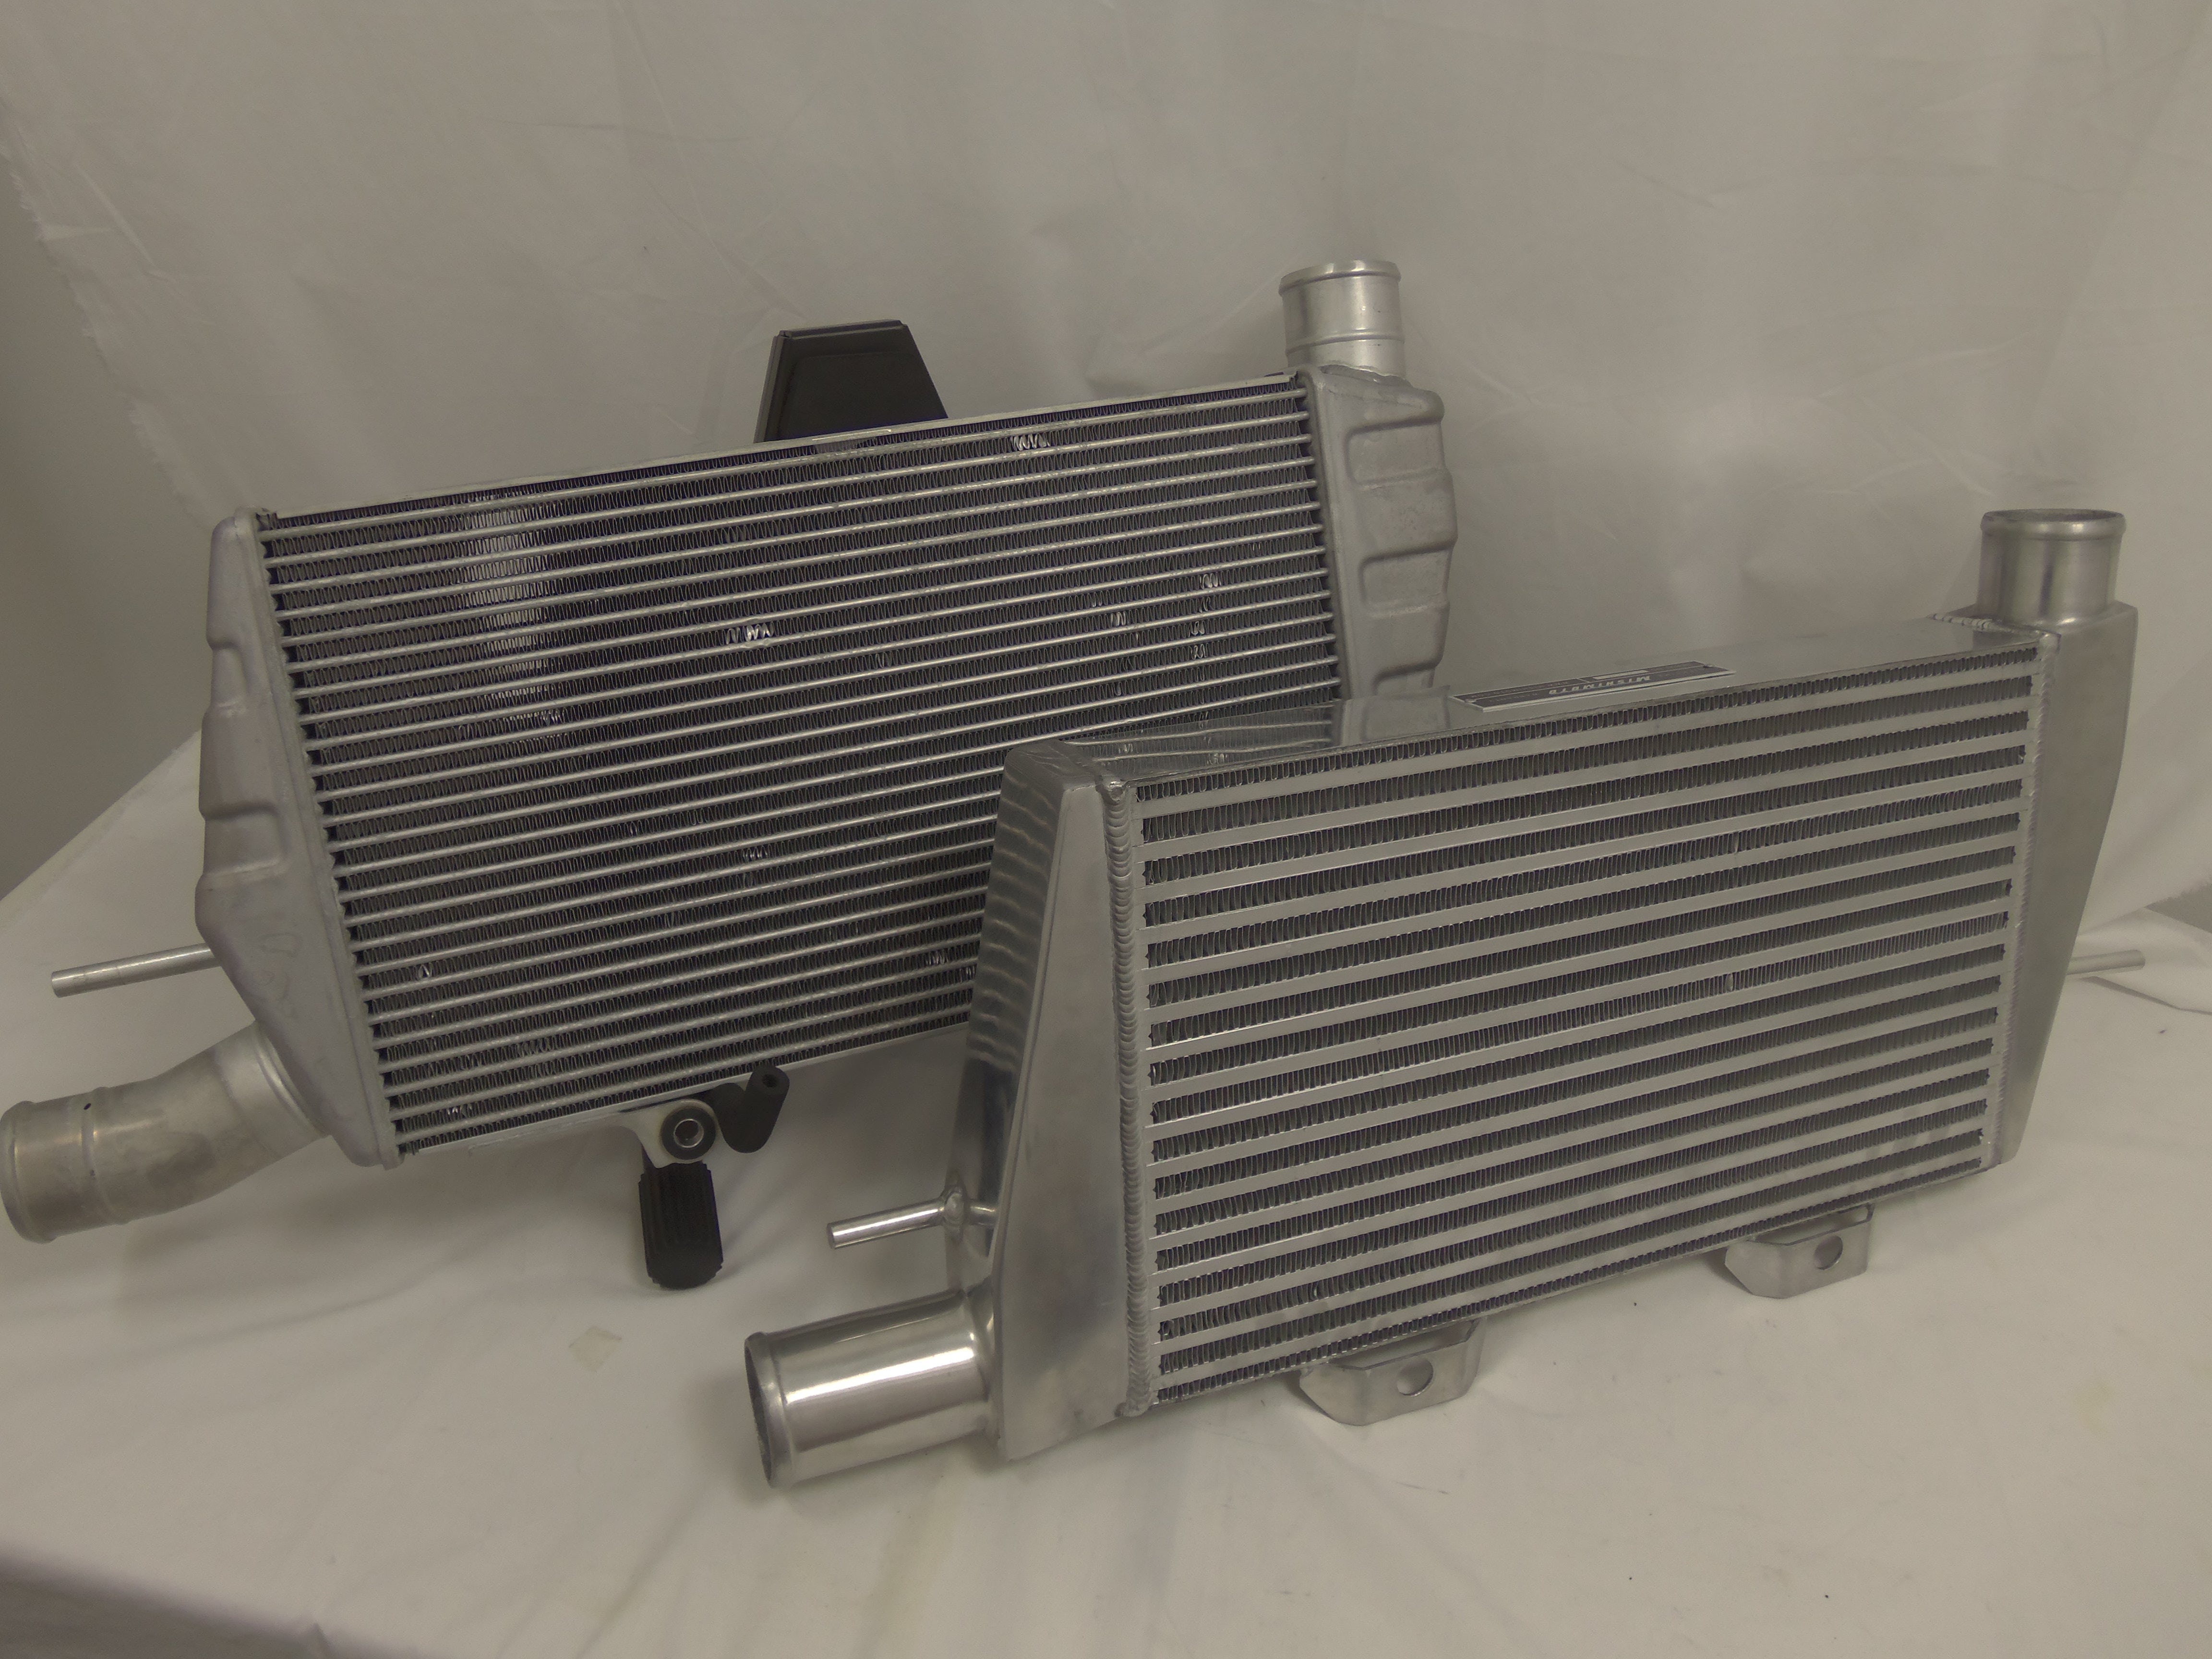 2008–2014 Mitsubishi Lancer Evolution Performance Intercooler Part 1: Product Introduction, Goals and Initial Testing